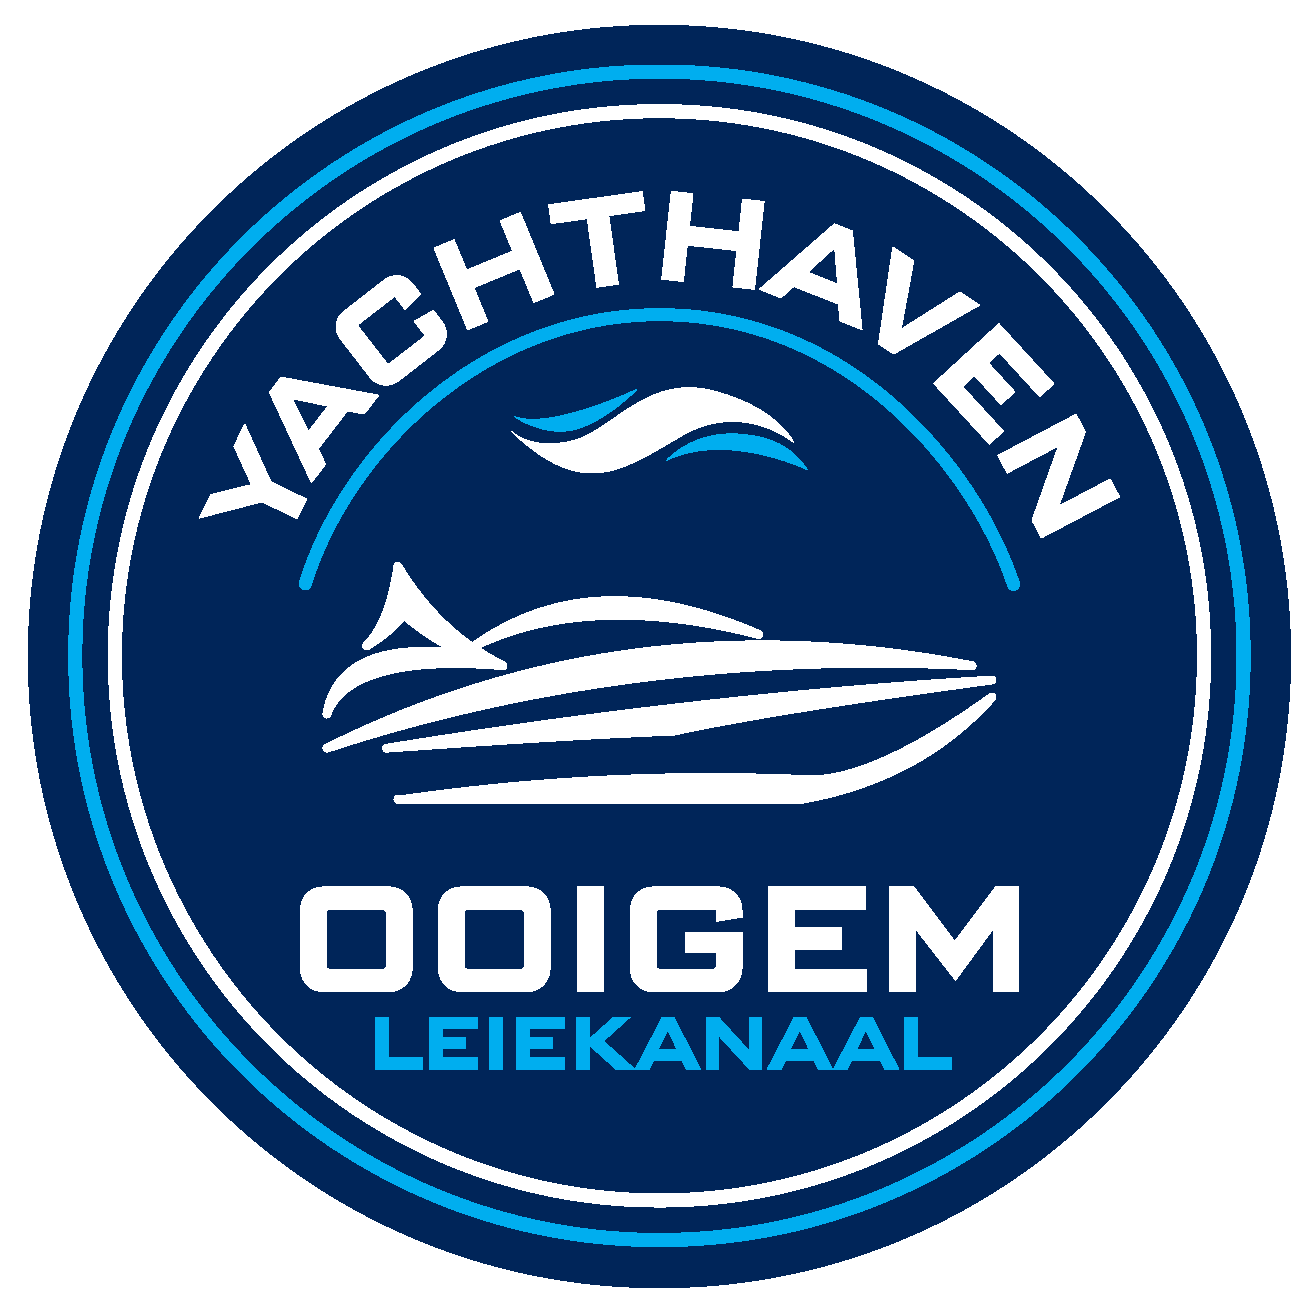 Yachthaven Ooigem